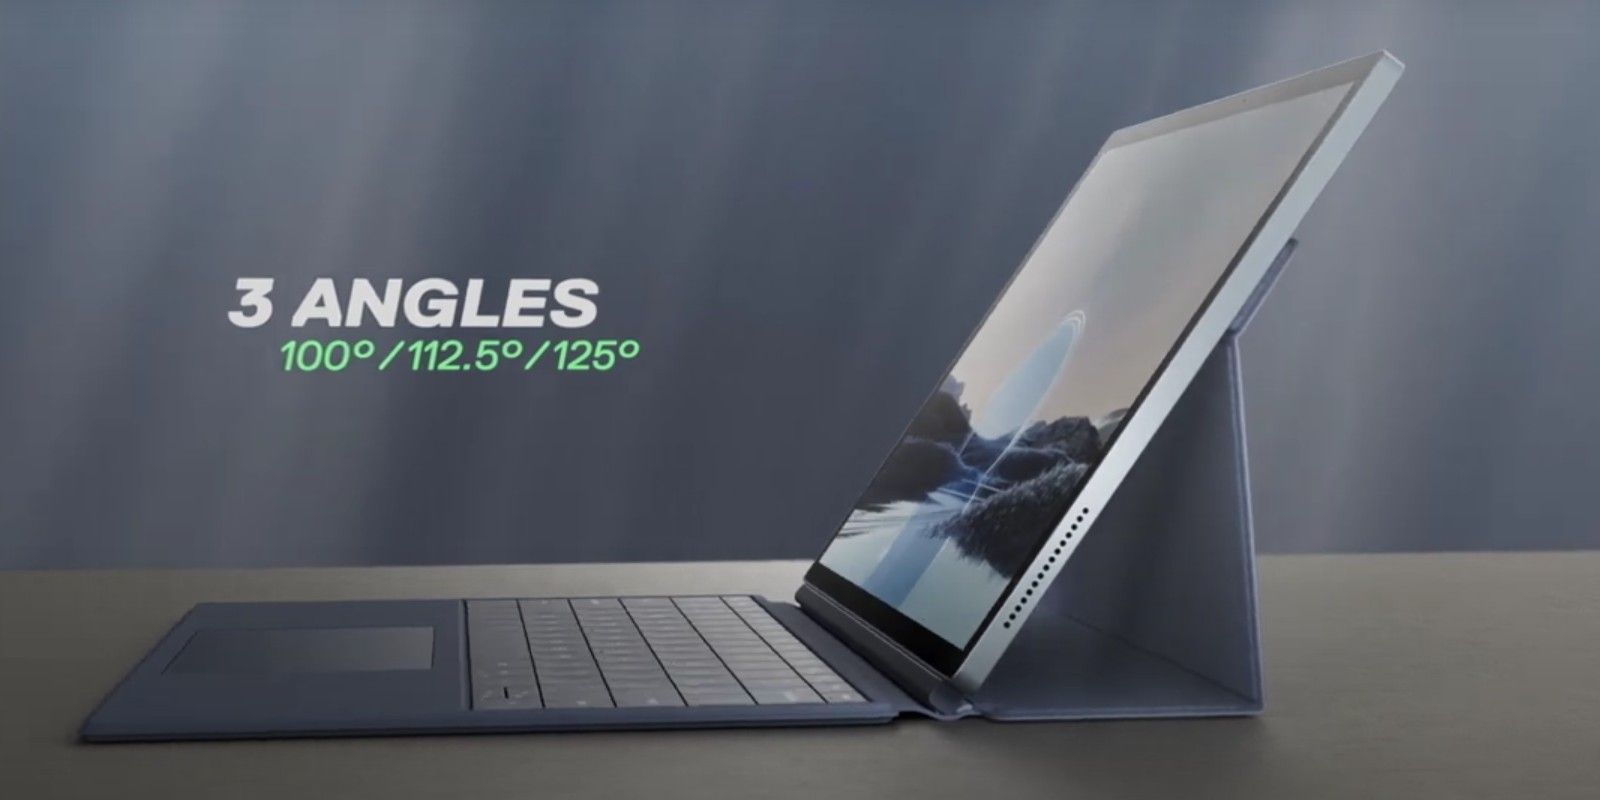 Dell’s New XPS Is A Detachable 2-in-1 With Optional 5G